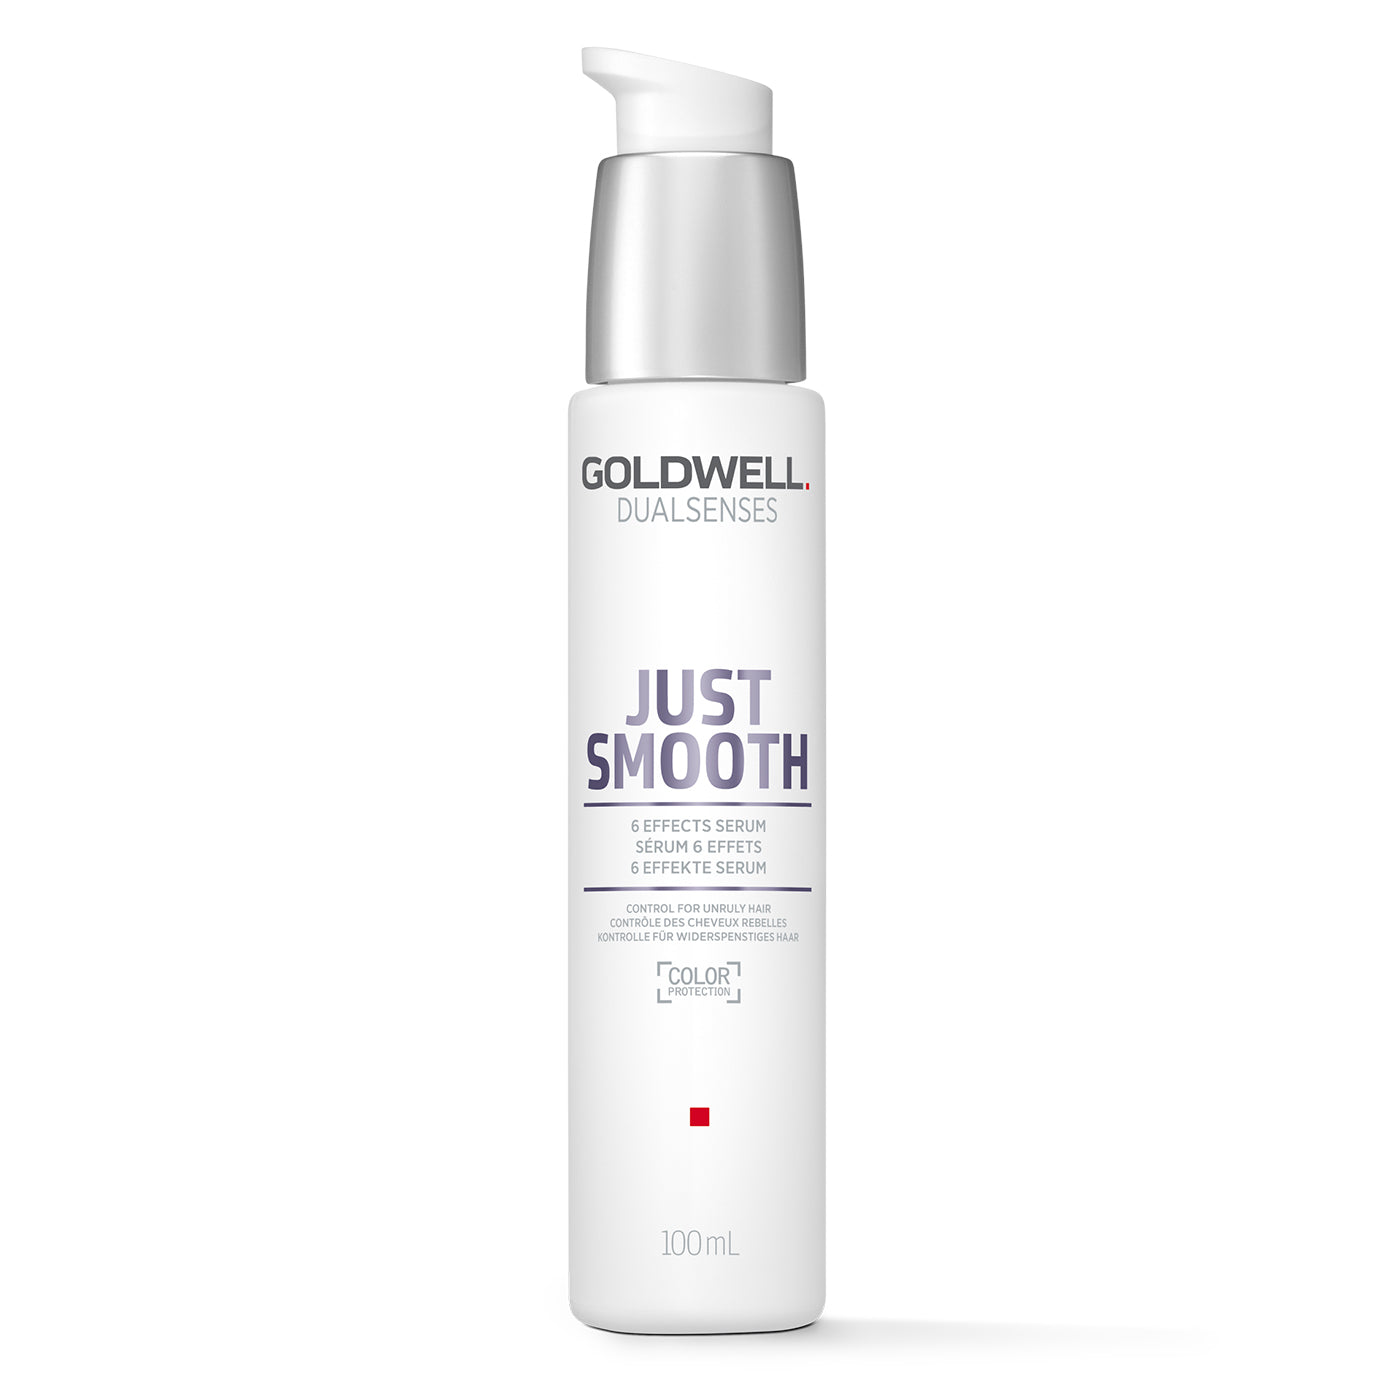 Goldwell DualSenses Just Smooth 6 Effects Serum (100ml) - Ultimate Hair and Beauty